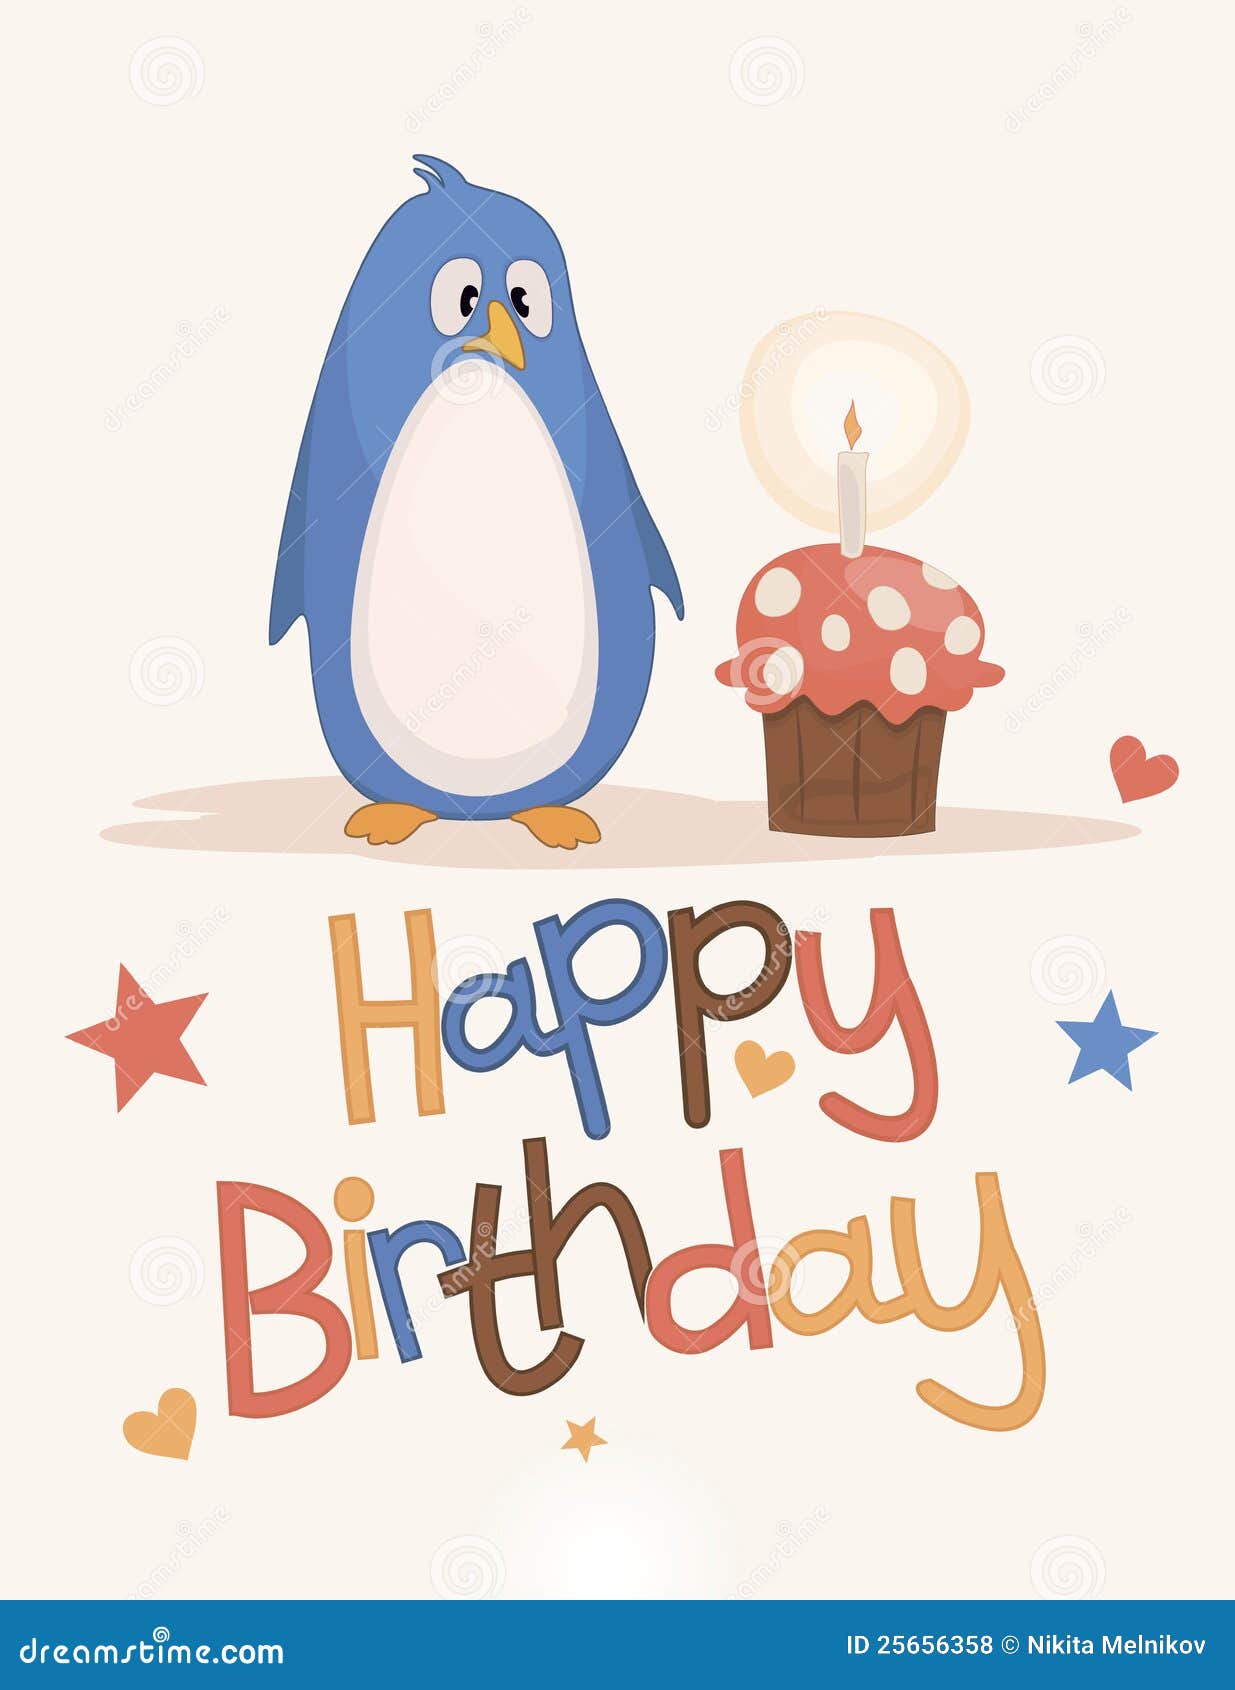 Cute happy birthday card stock vector. Illustration of cold - 25656358